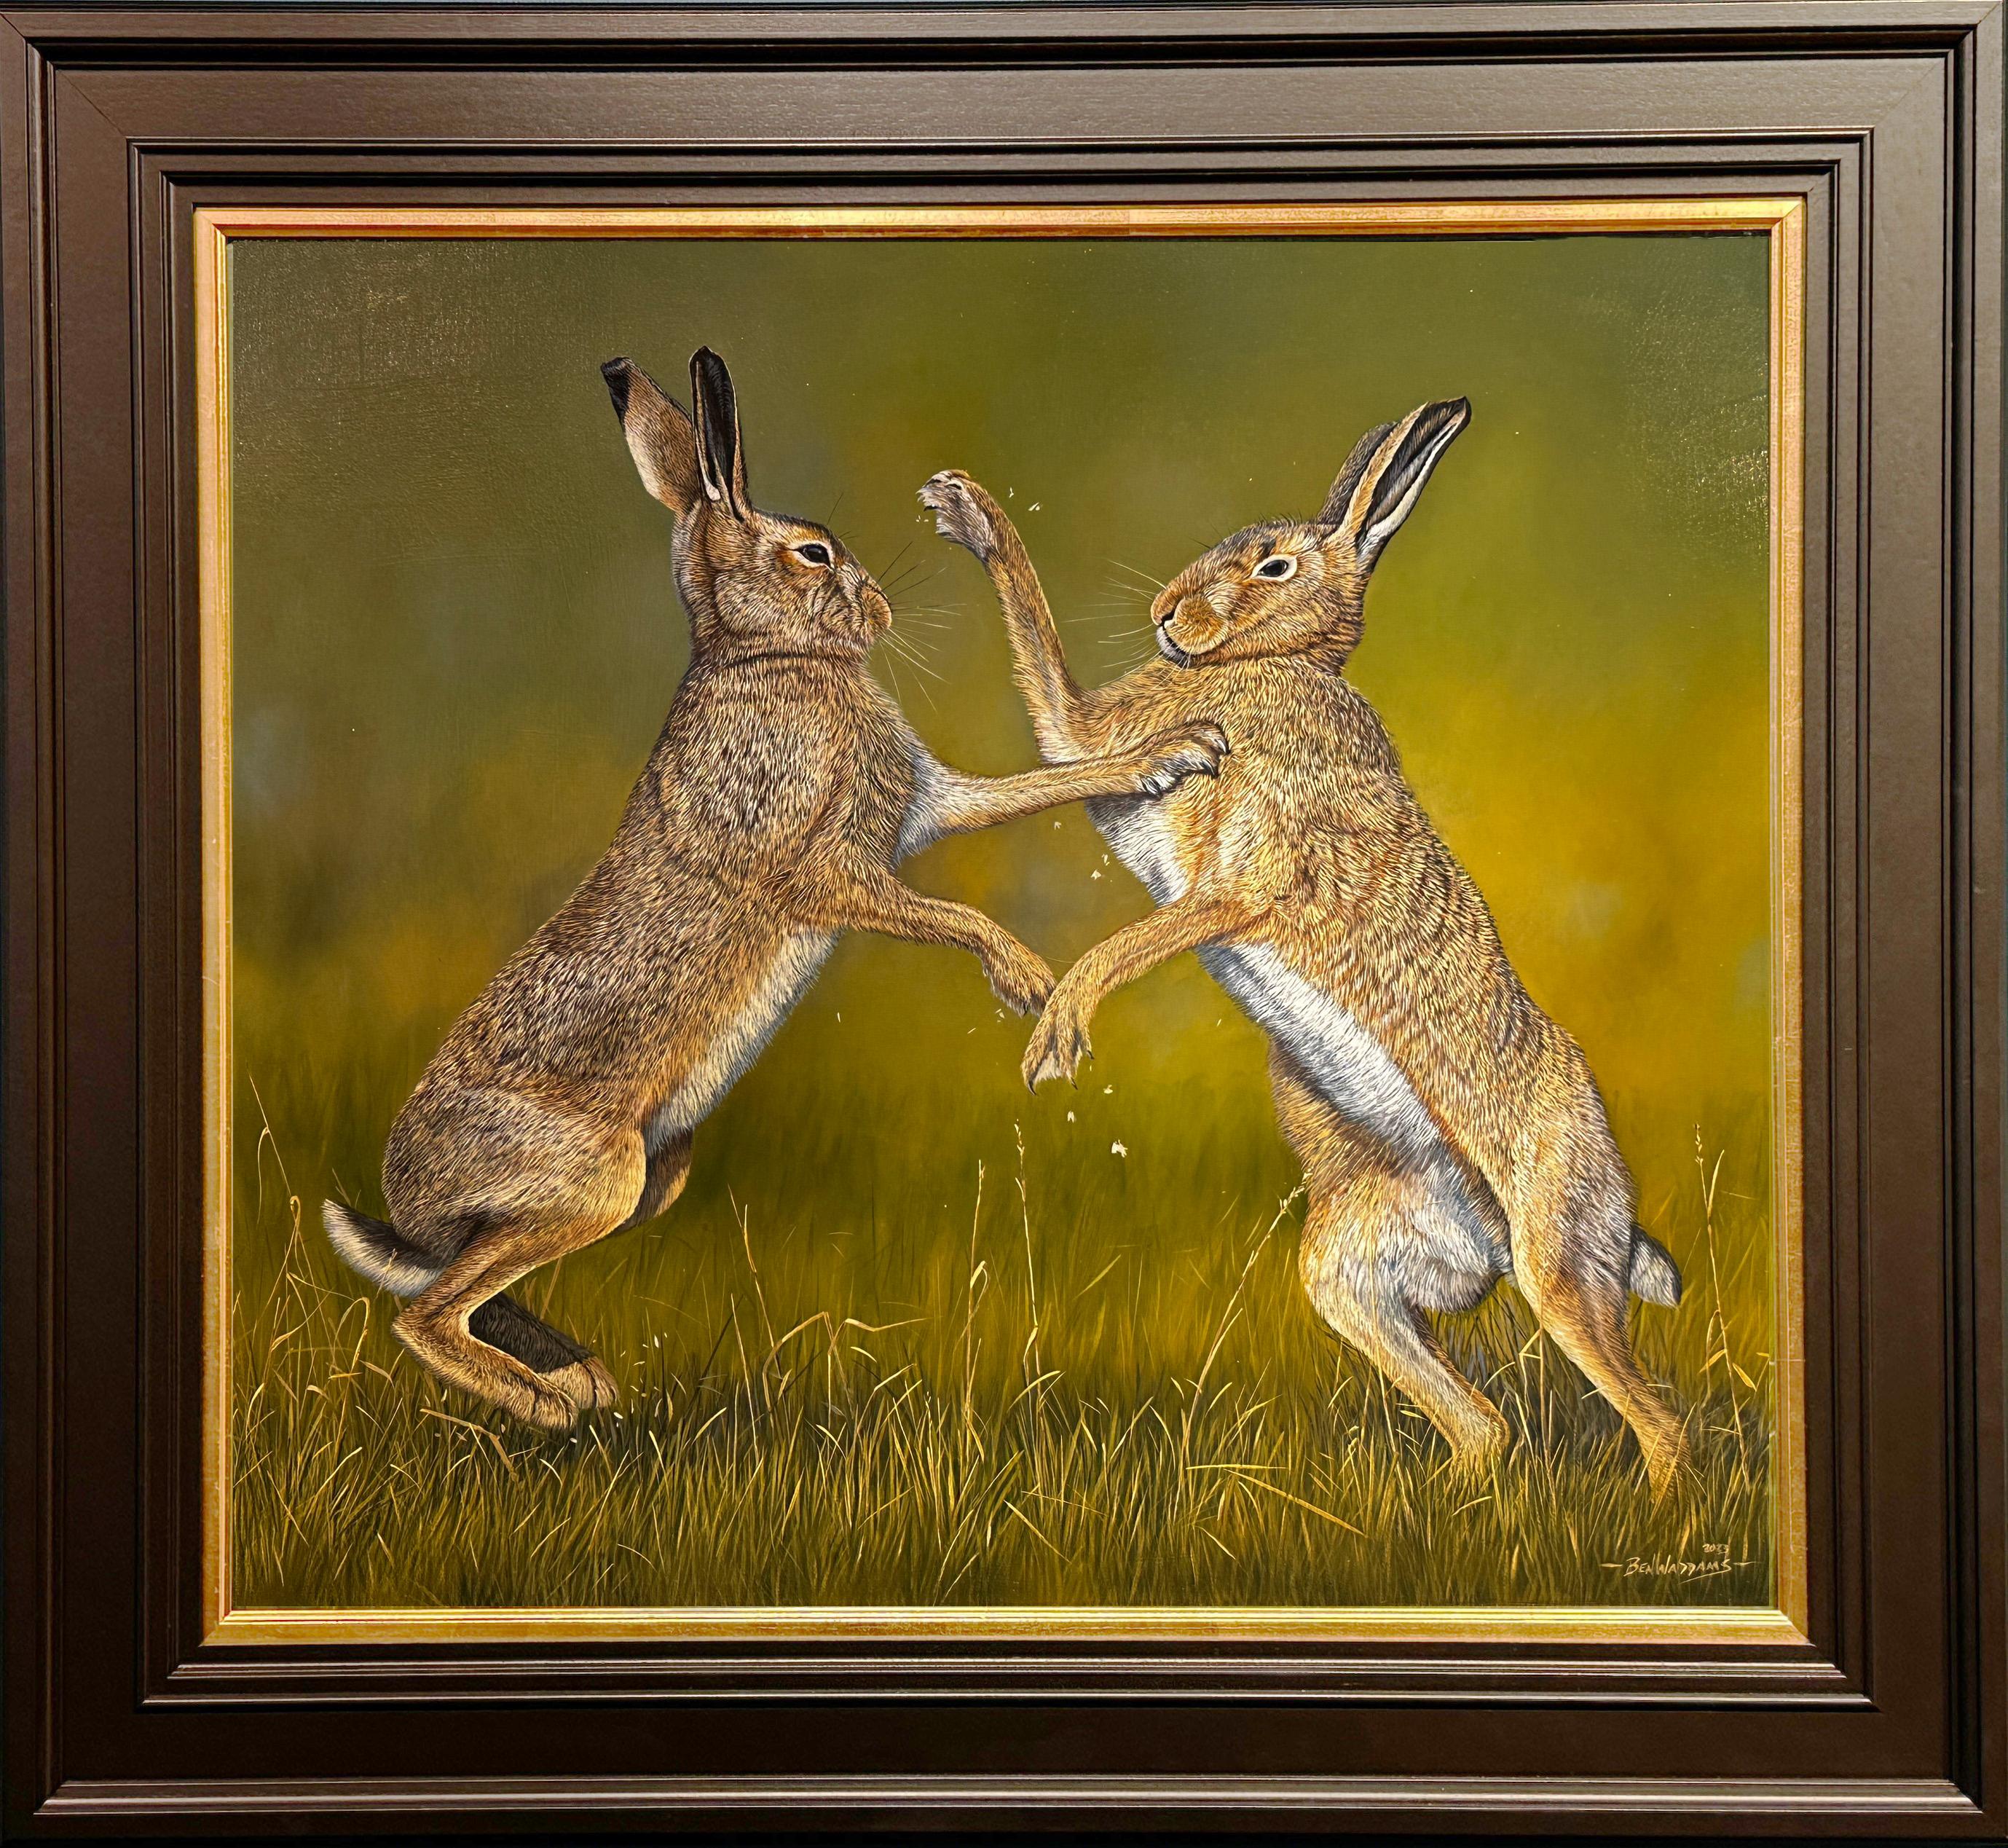 Ben Waddams Animal Painting - 'MadMarch' Contemporary Photorealist Wildlife painting of two boxing hares